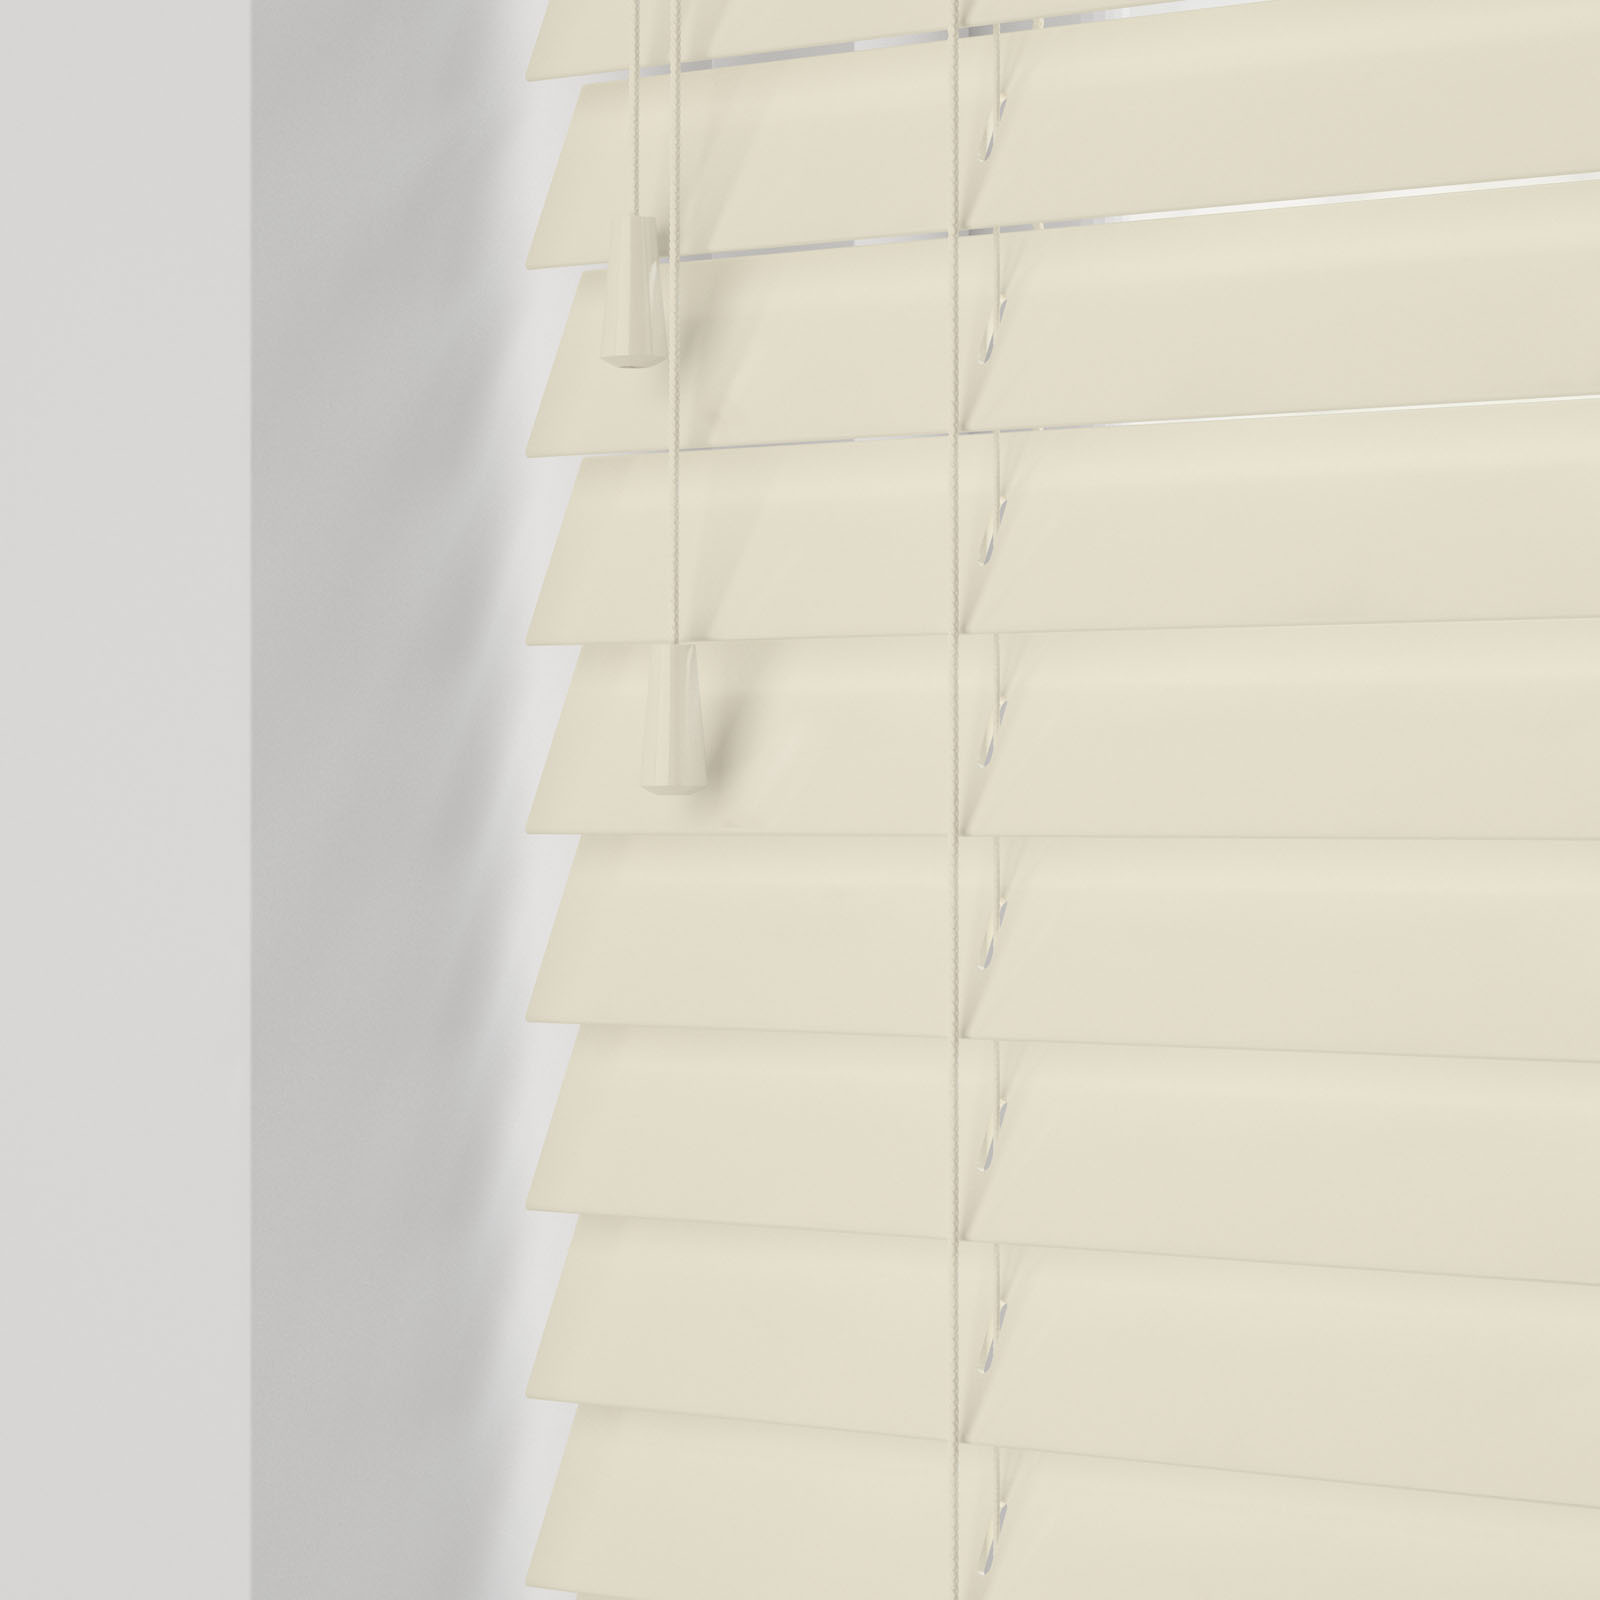 Suppliers of Venetian Blinds With Cord Or Tape Options UK